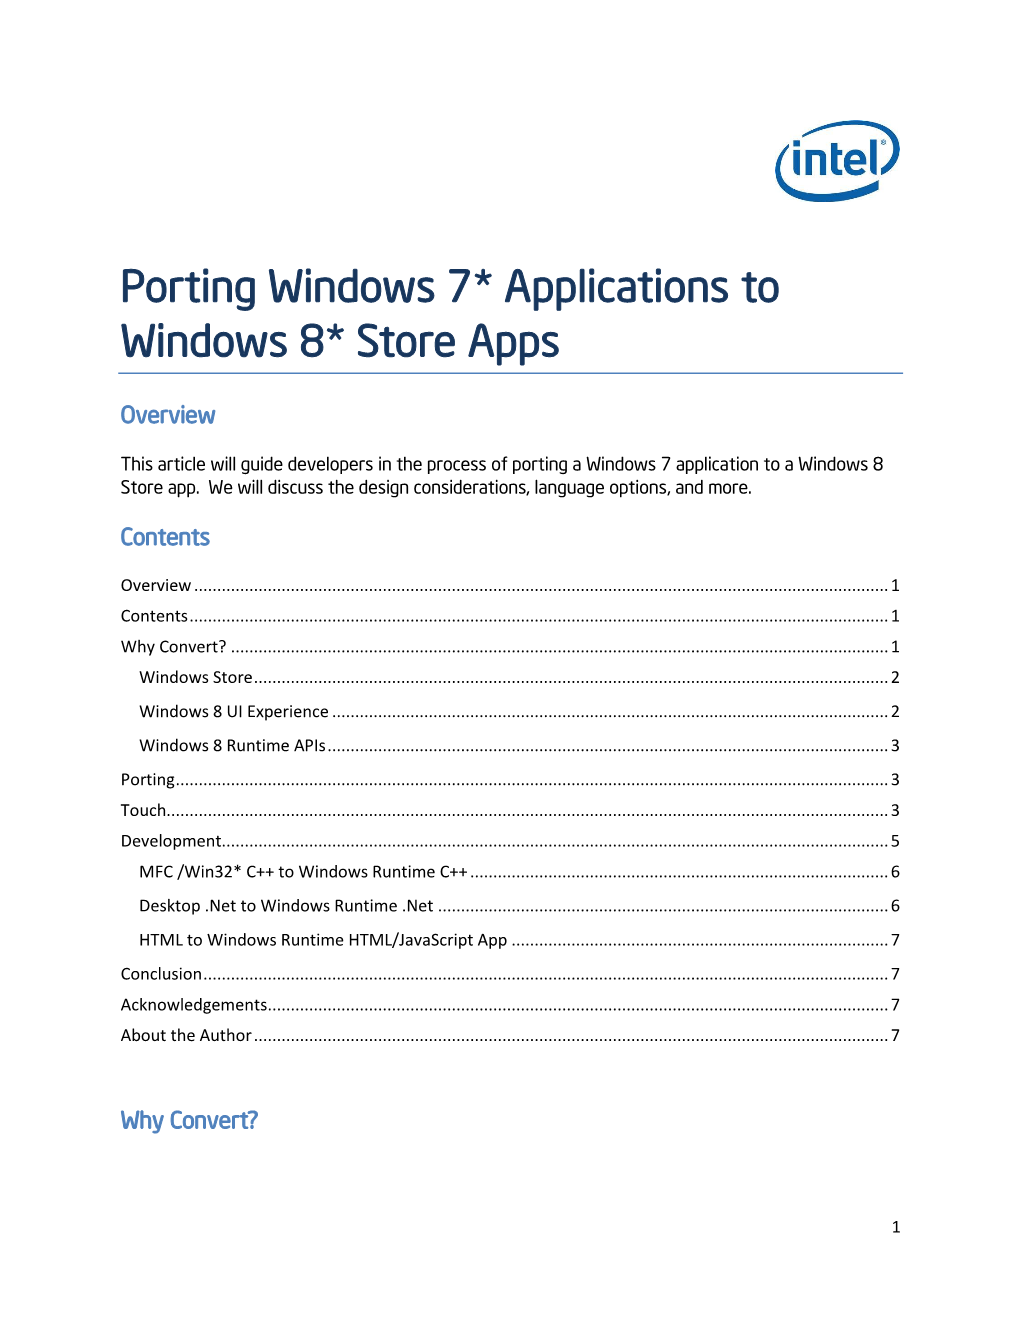 Porting Windows 7* Applications to Windows 8* Store Apps